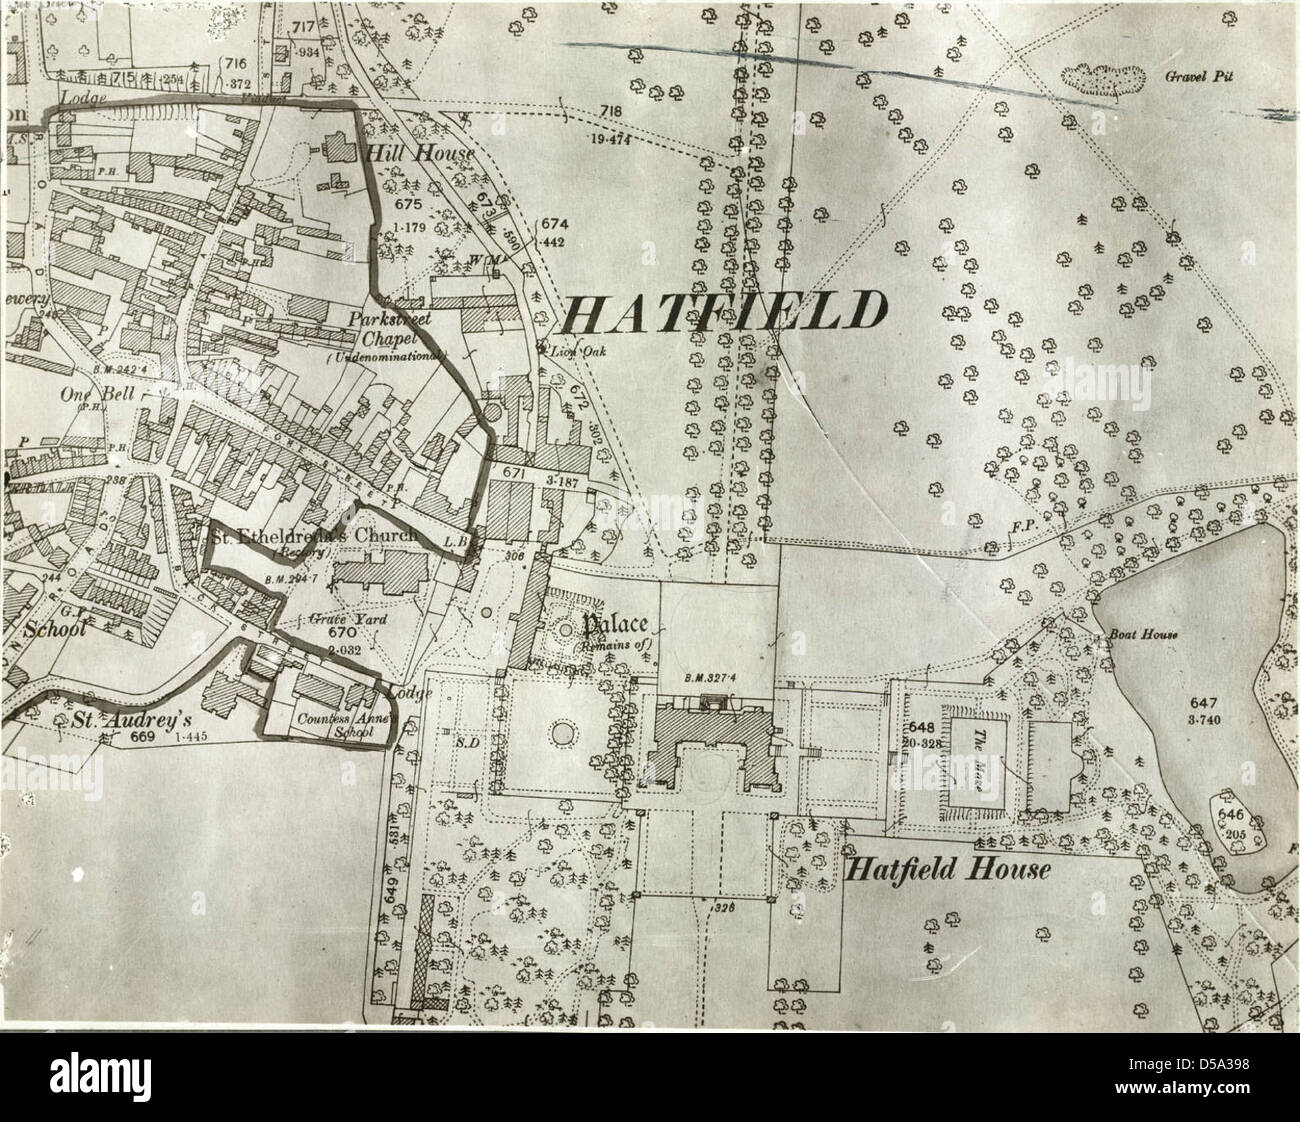 Hatfield House, Plan of Grounds Stock Photo